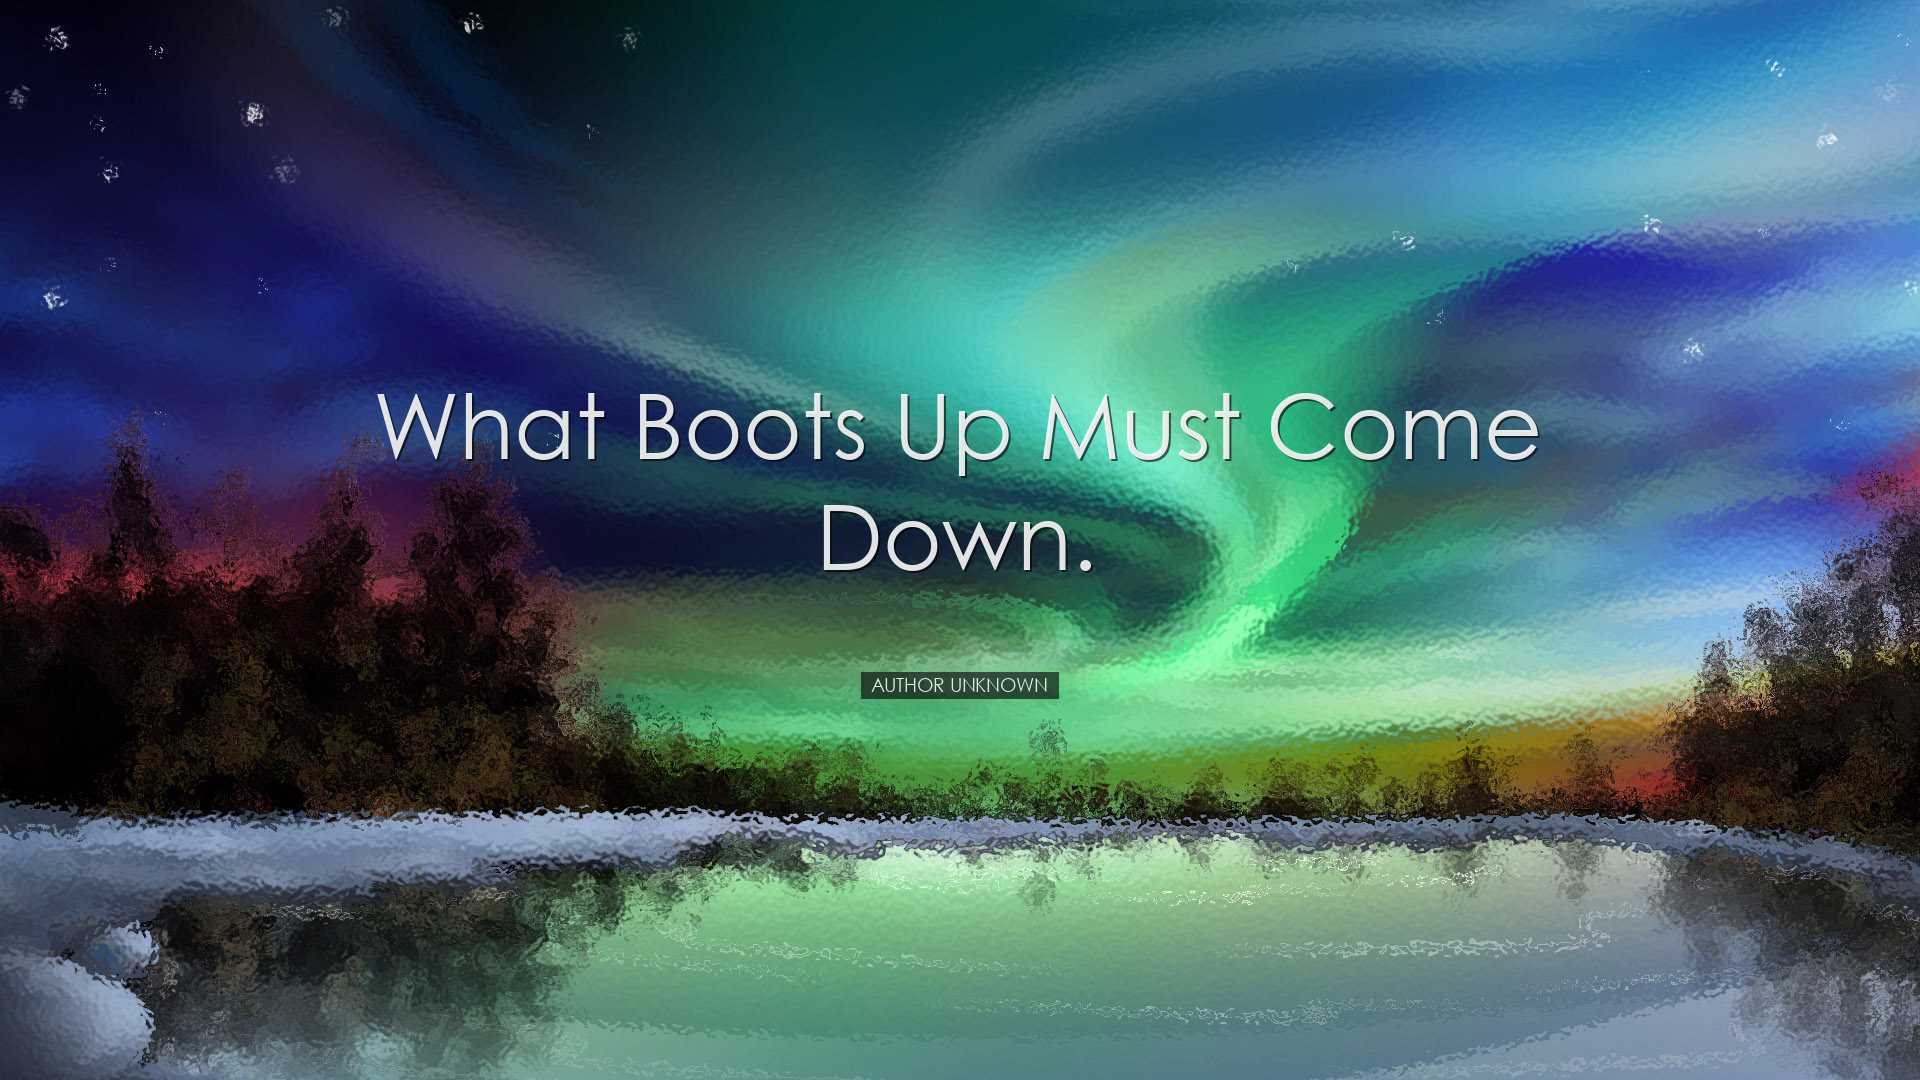 What boots up must come down. - Author Unknown